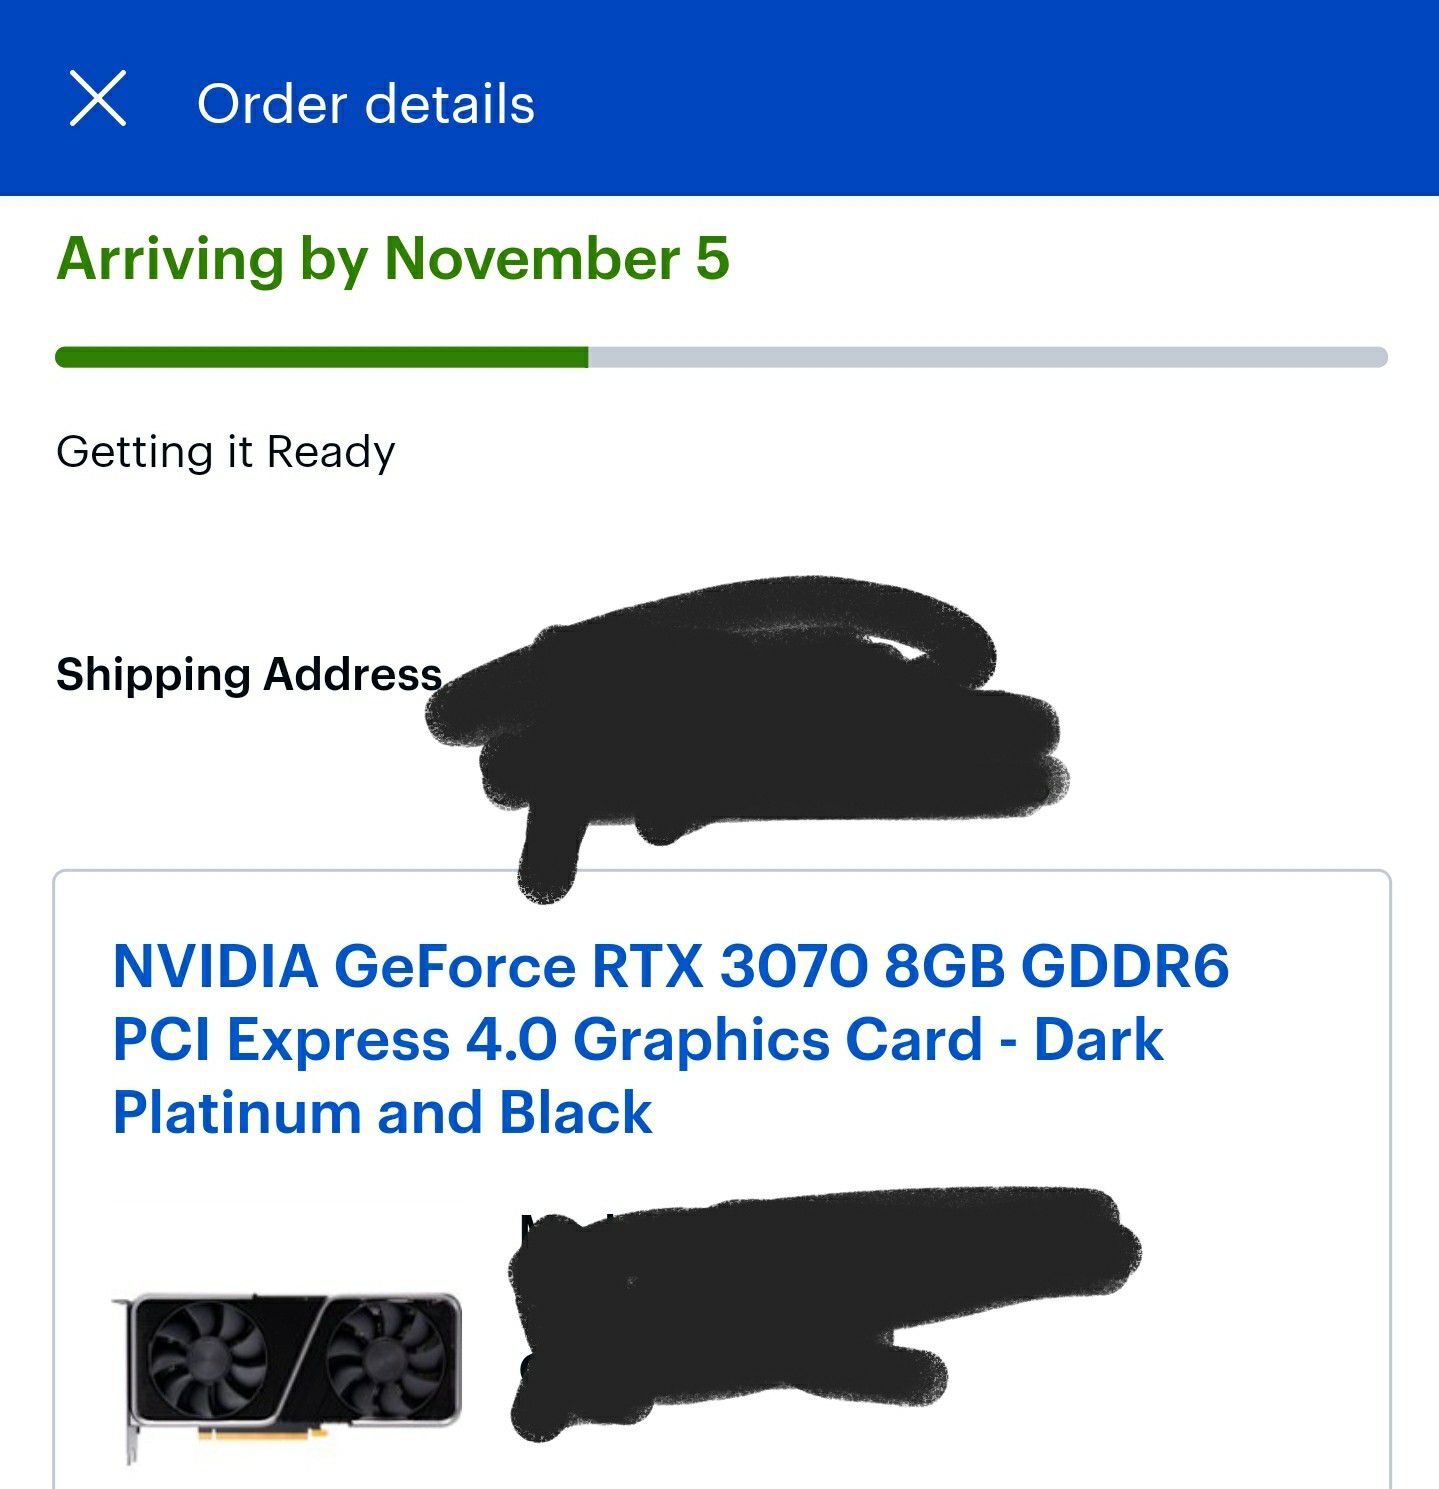 NVIDIA GeForce RTX 3070 Founders Edition 8GB GDDR6 Graphics Card CONFIRMED ORDER